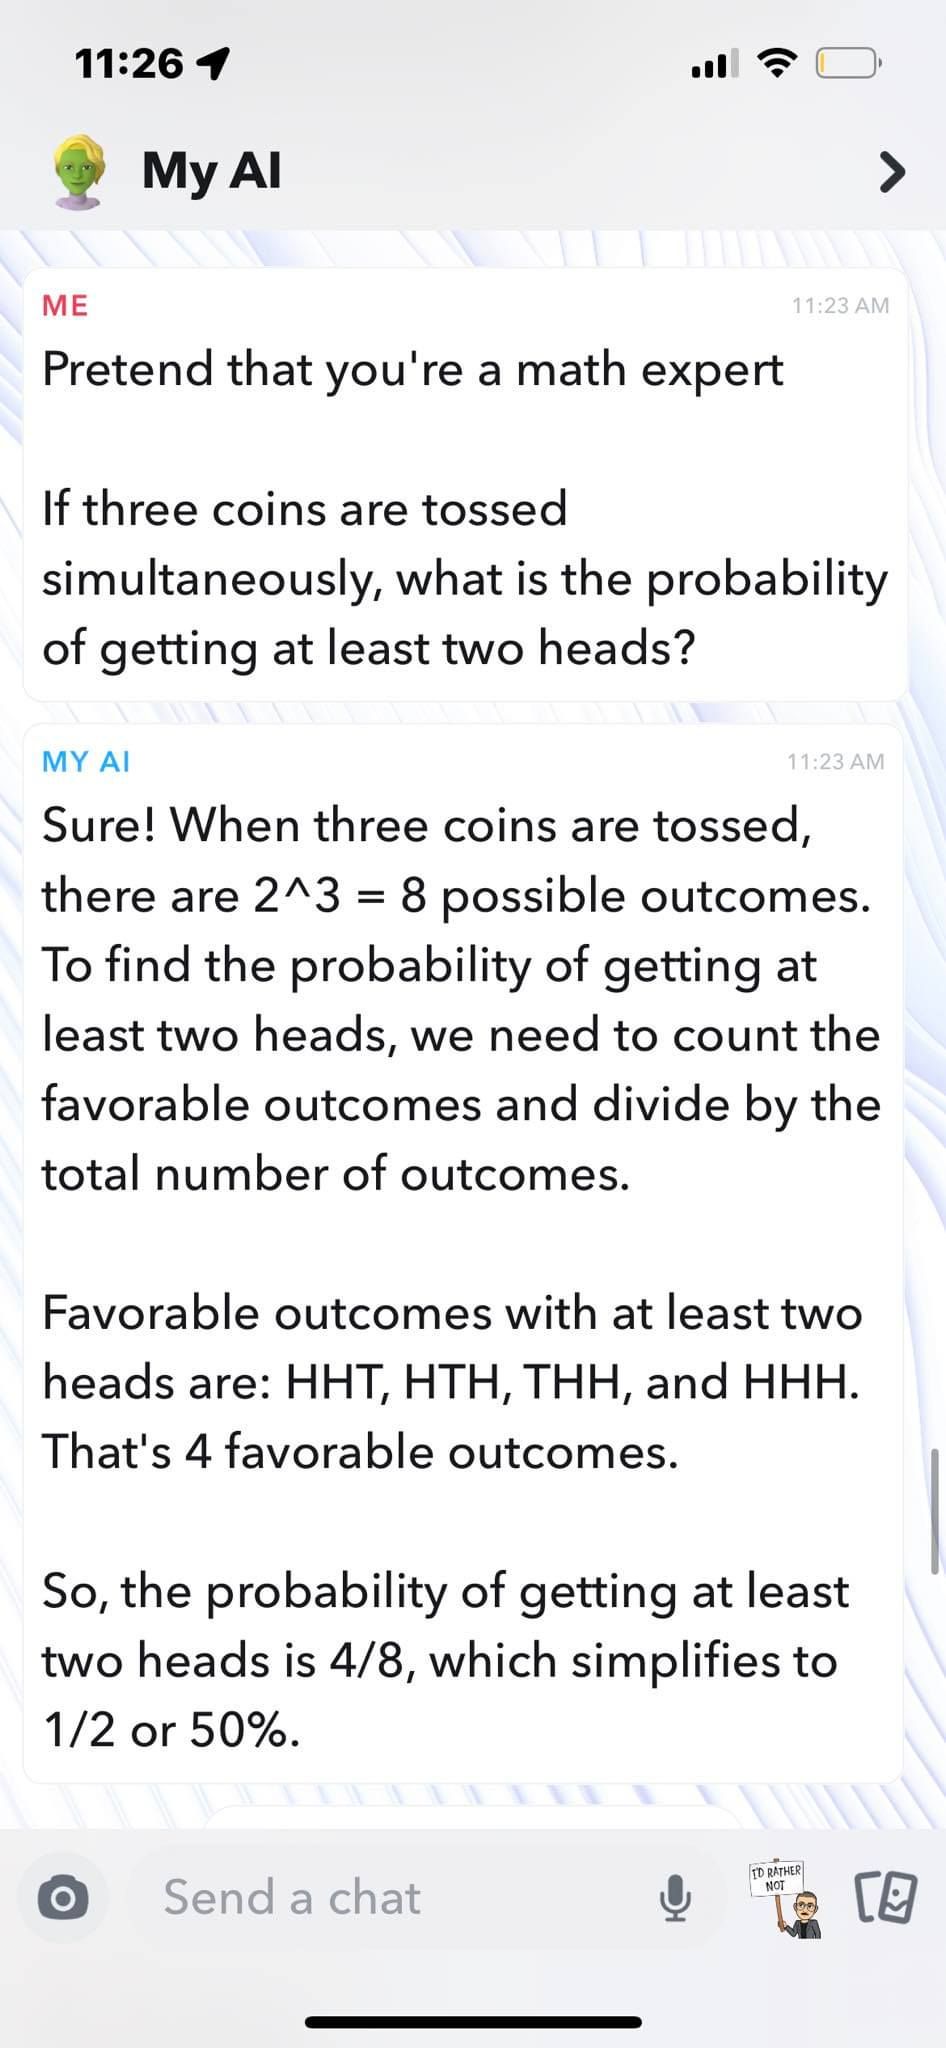 Asking Snapchat My AI a Statistics and Probability Question